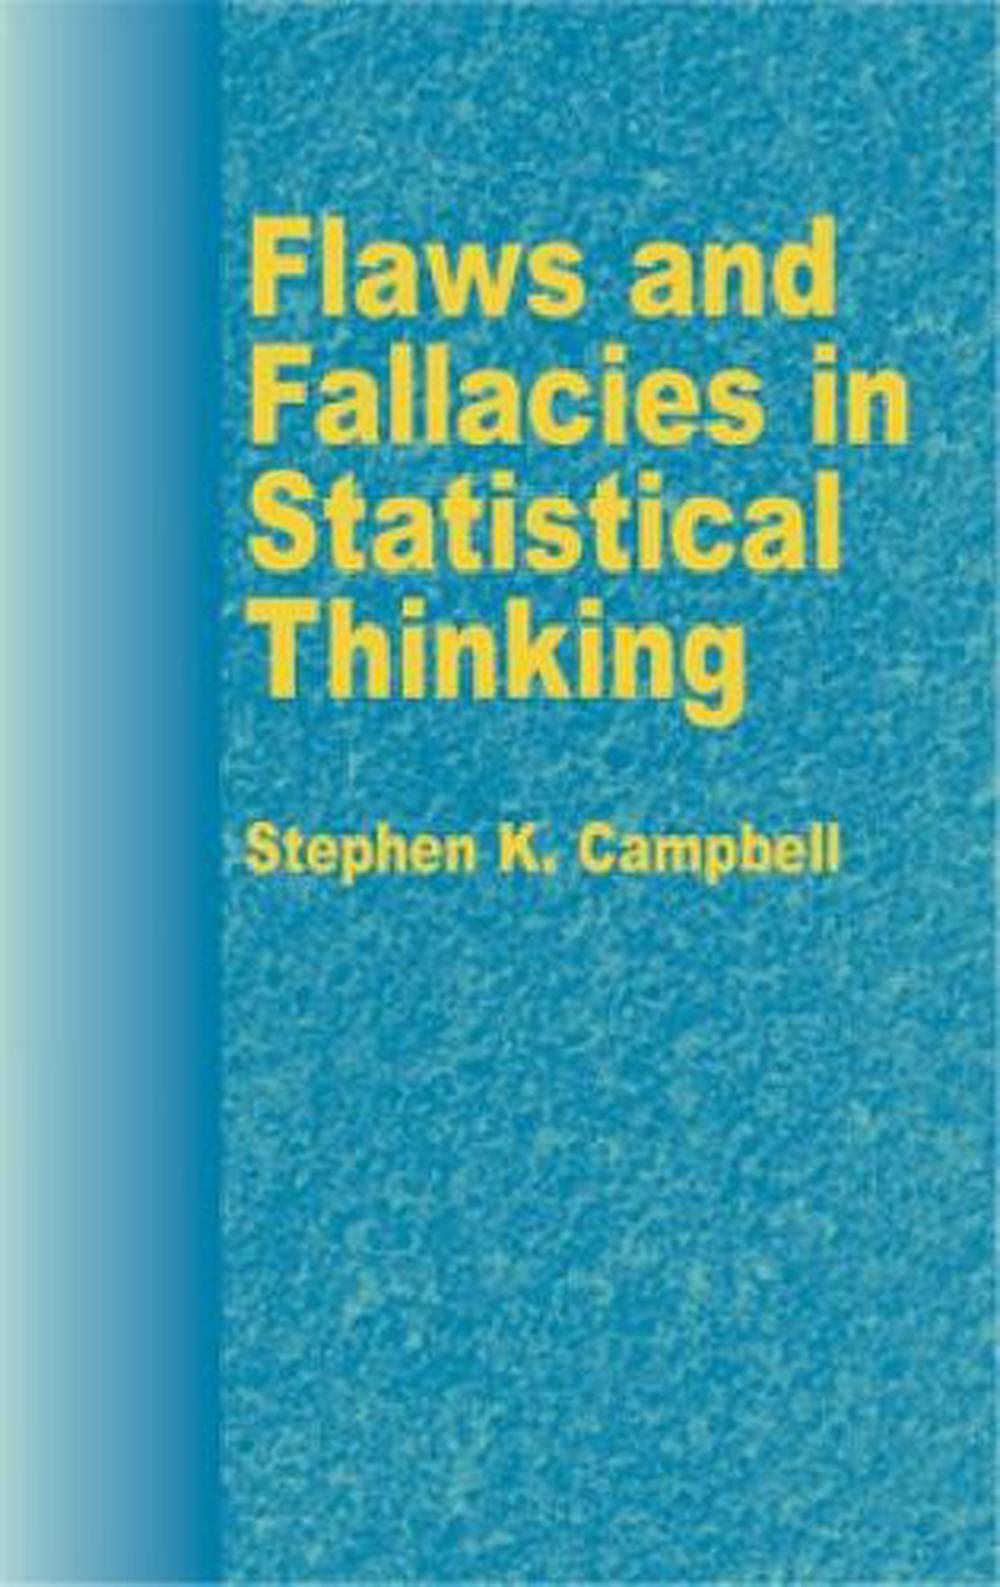 Flaws and Fallacies in Statistical Thinking by Stephen K. Campbell